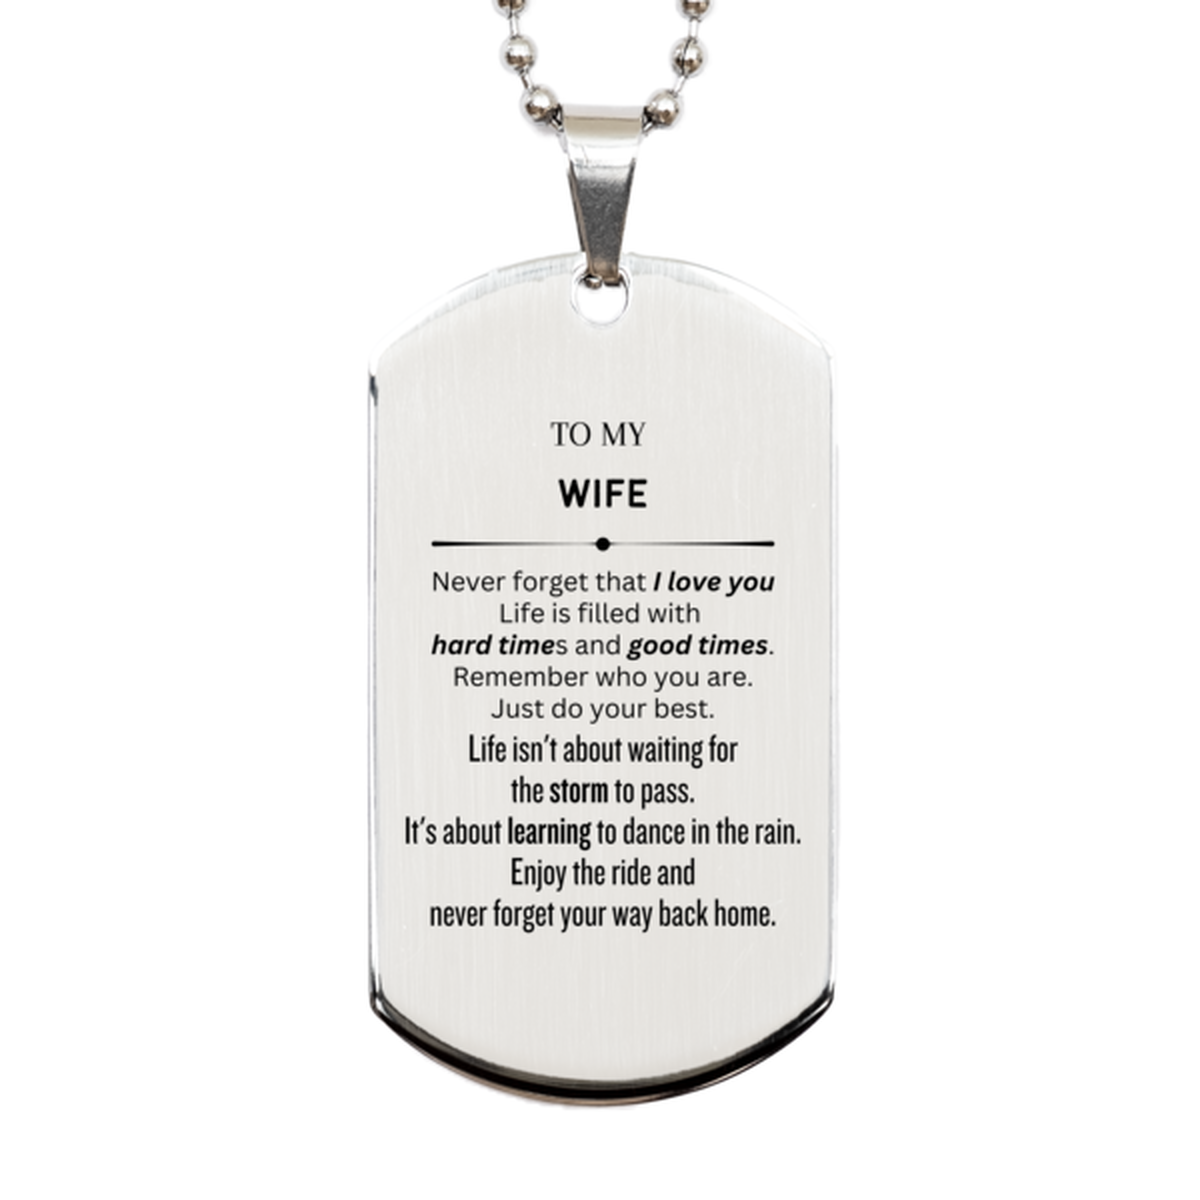 Christmas Wife Silver Dog Tag Gifts, To My Wife Birthday Thank You Gifts For Wife, Graduation Unique Gifts For Wife To My Wife Never forget that I love you life is filled with hard times and good times. Remember who you are. Just do your best